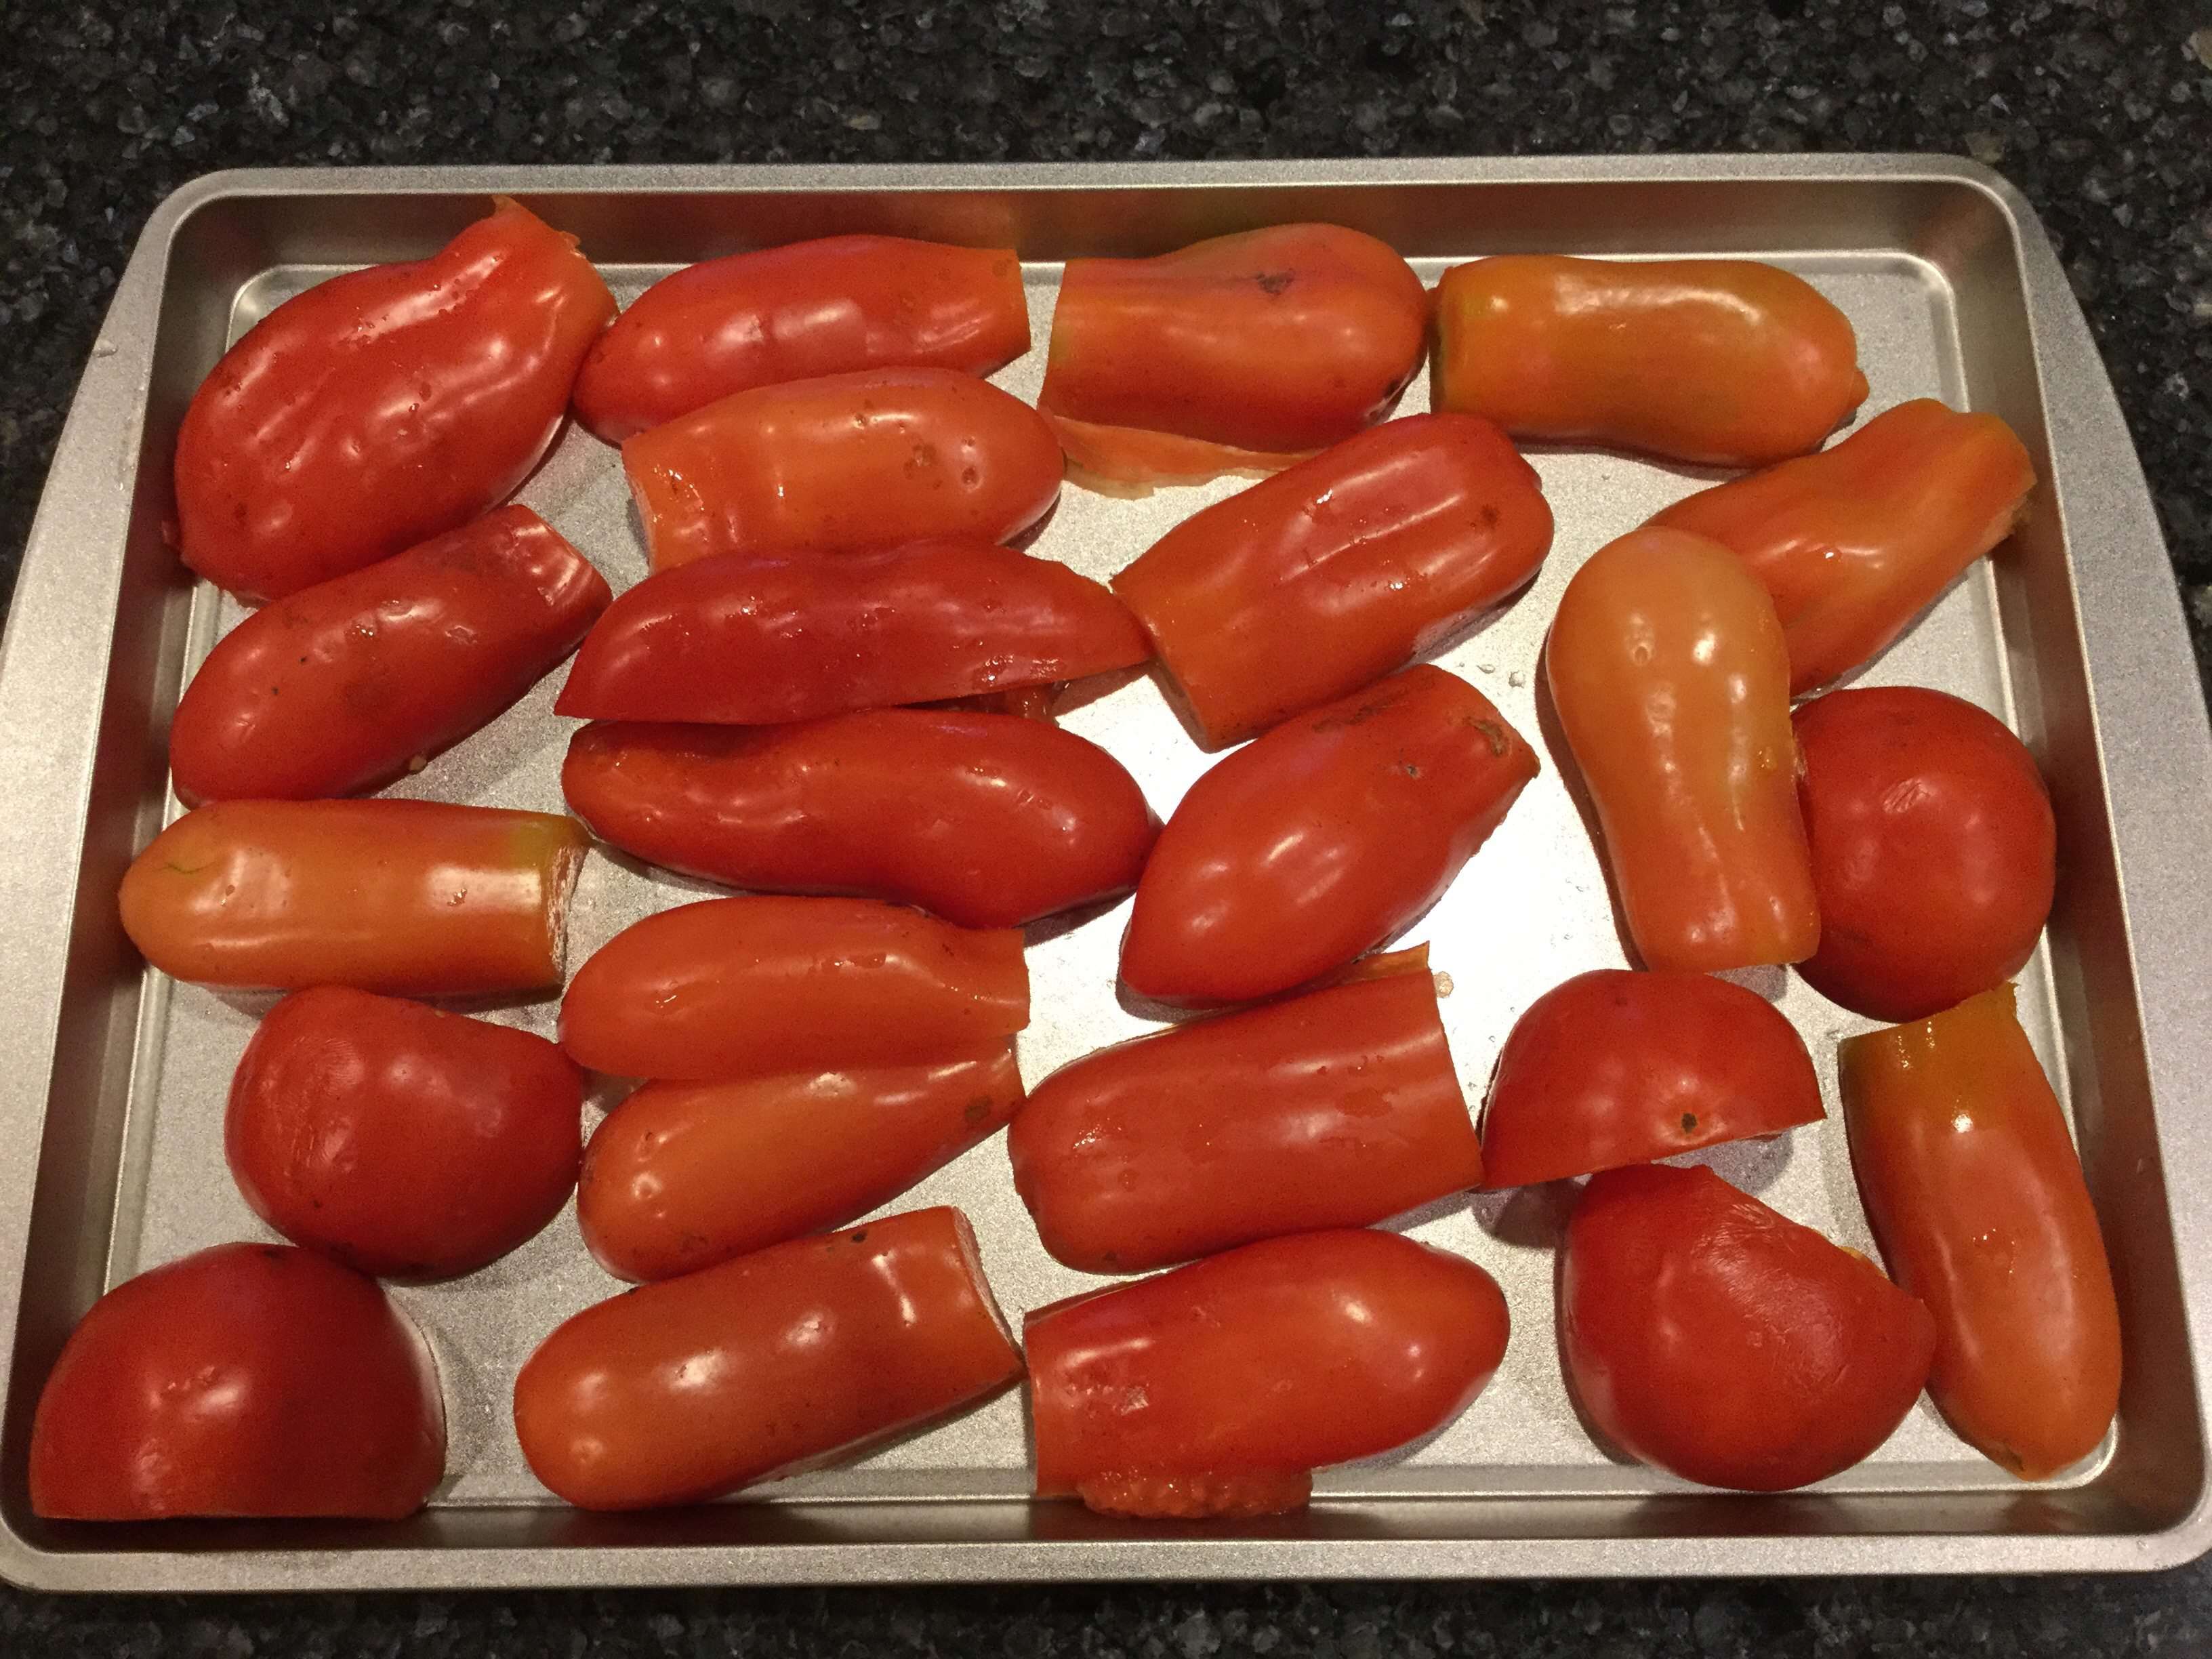 Cut these tomatoes in 1/2 and place in a single layer on a cookie sheet or two (or a pan of your choice).